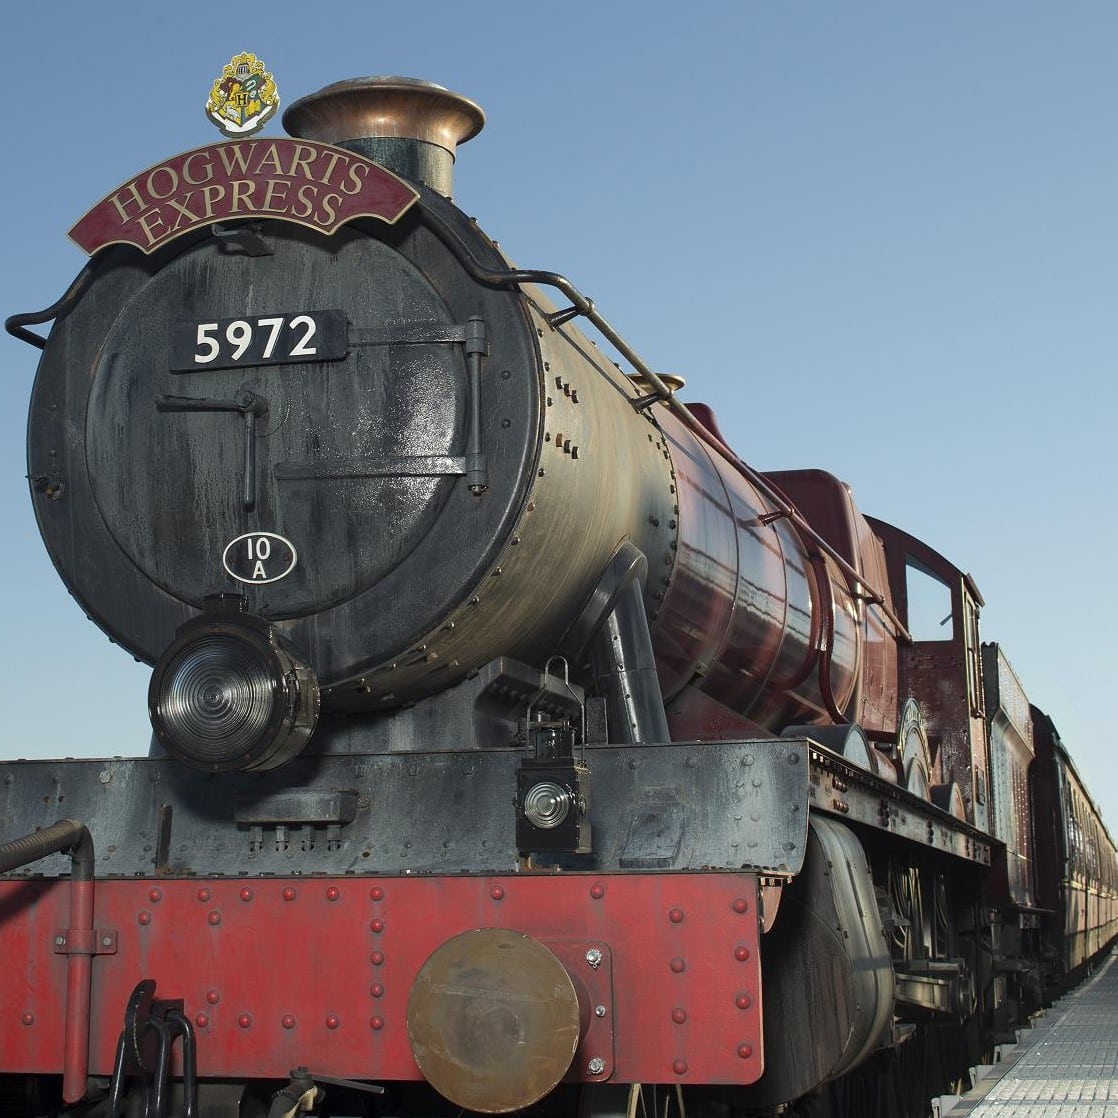 New details revealed about the Hogwarts Express at Universal Orlando